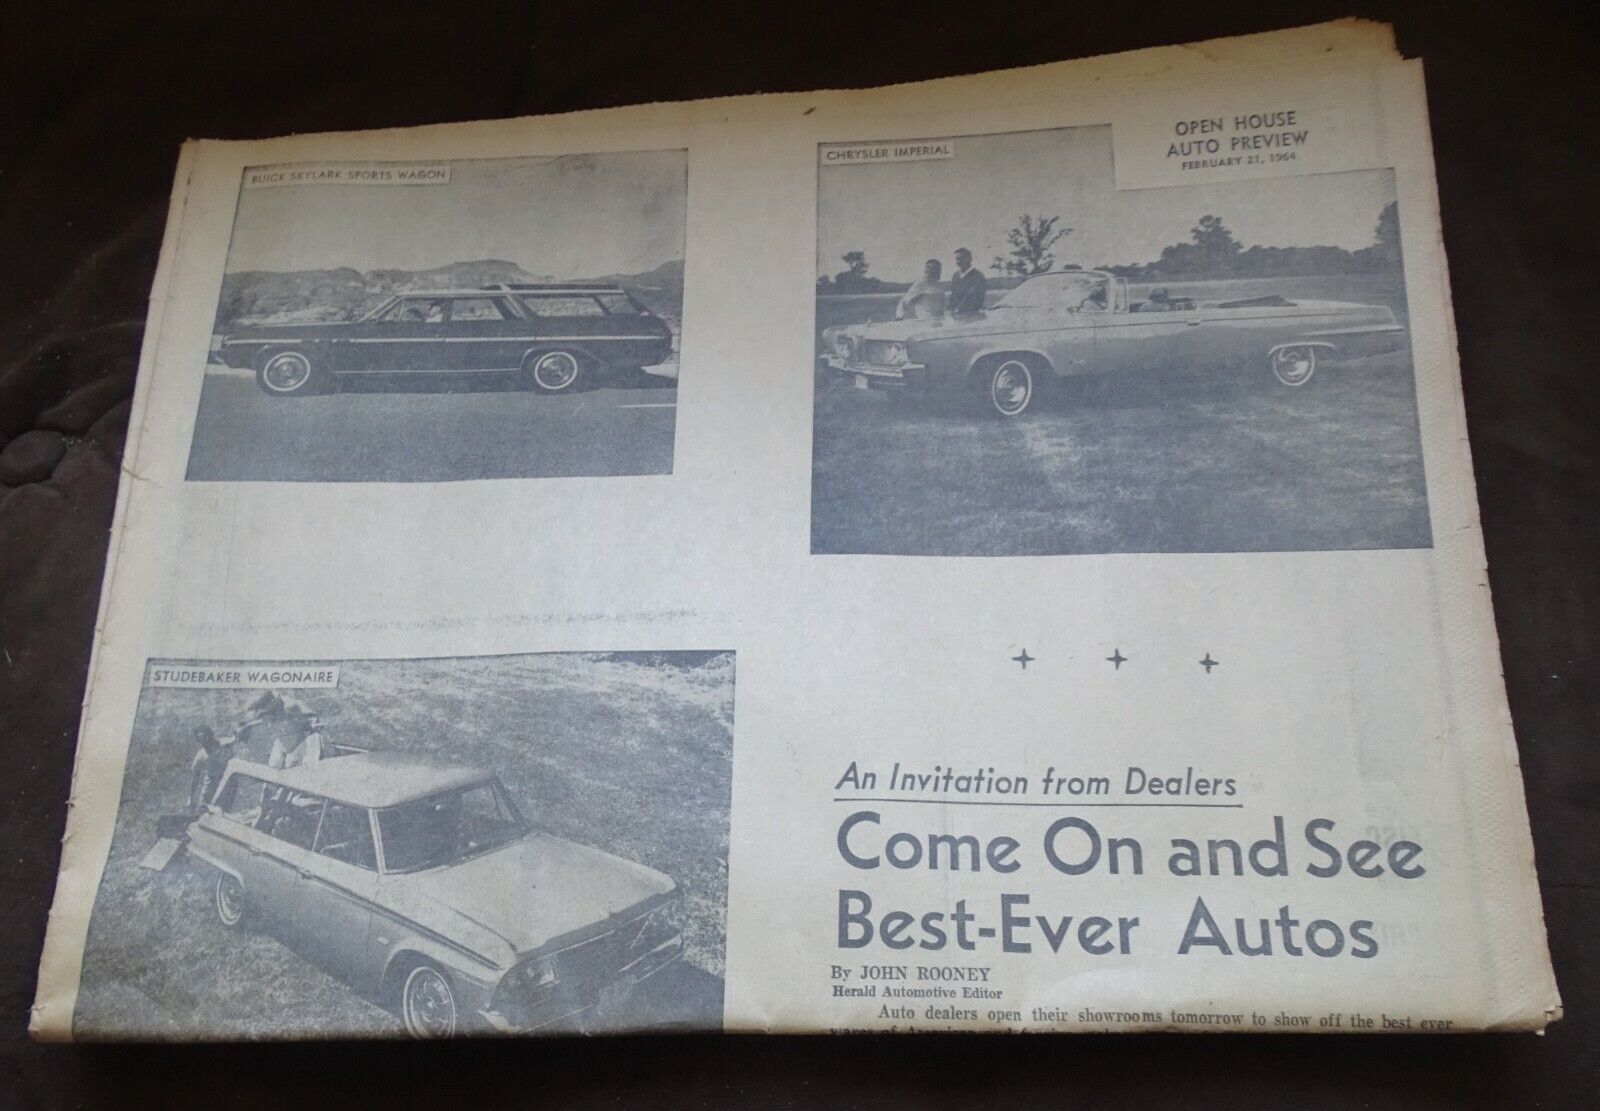 February 21, 1964 Boston Herald Auto Preview Section (Car Automobile Ads, etc)